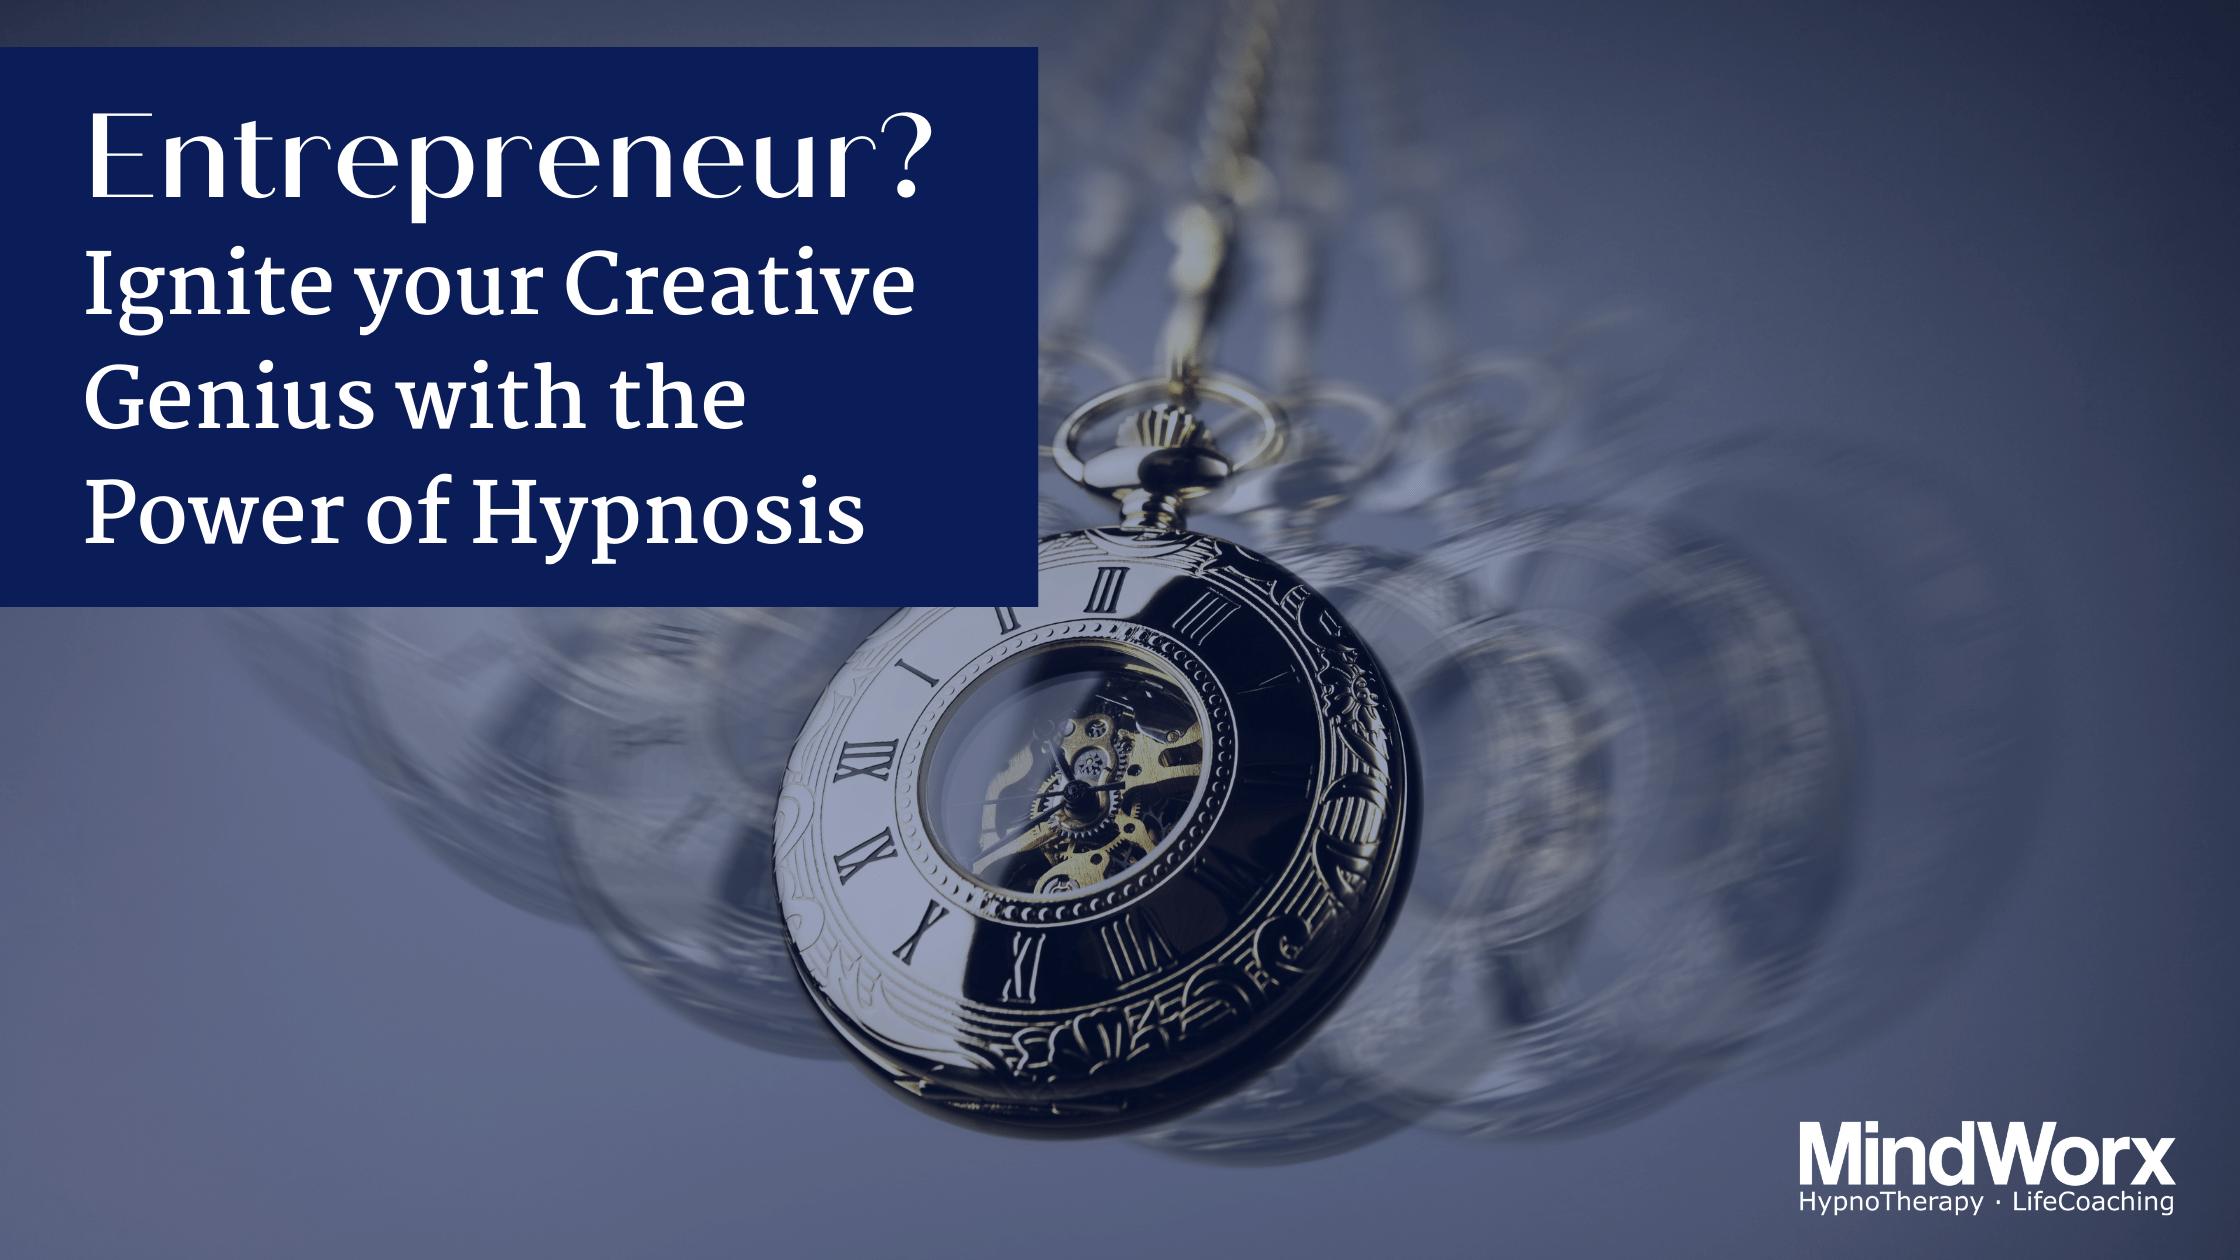 Entrepreneur? Ignite your Creative Genius with the Power of Hypnosis